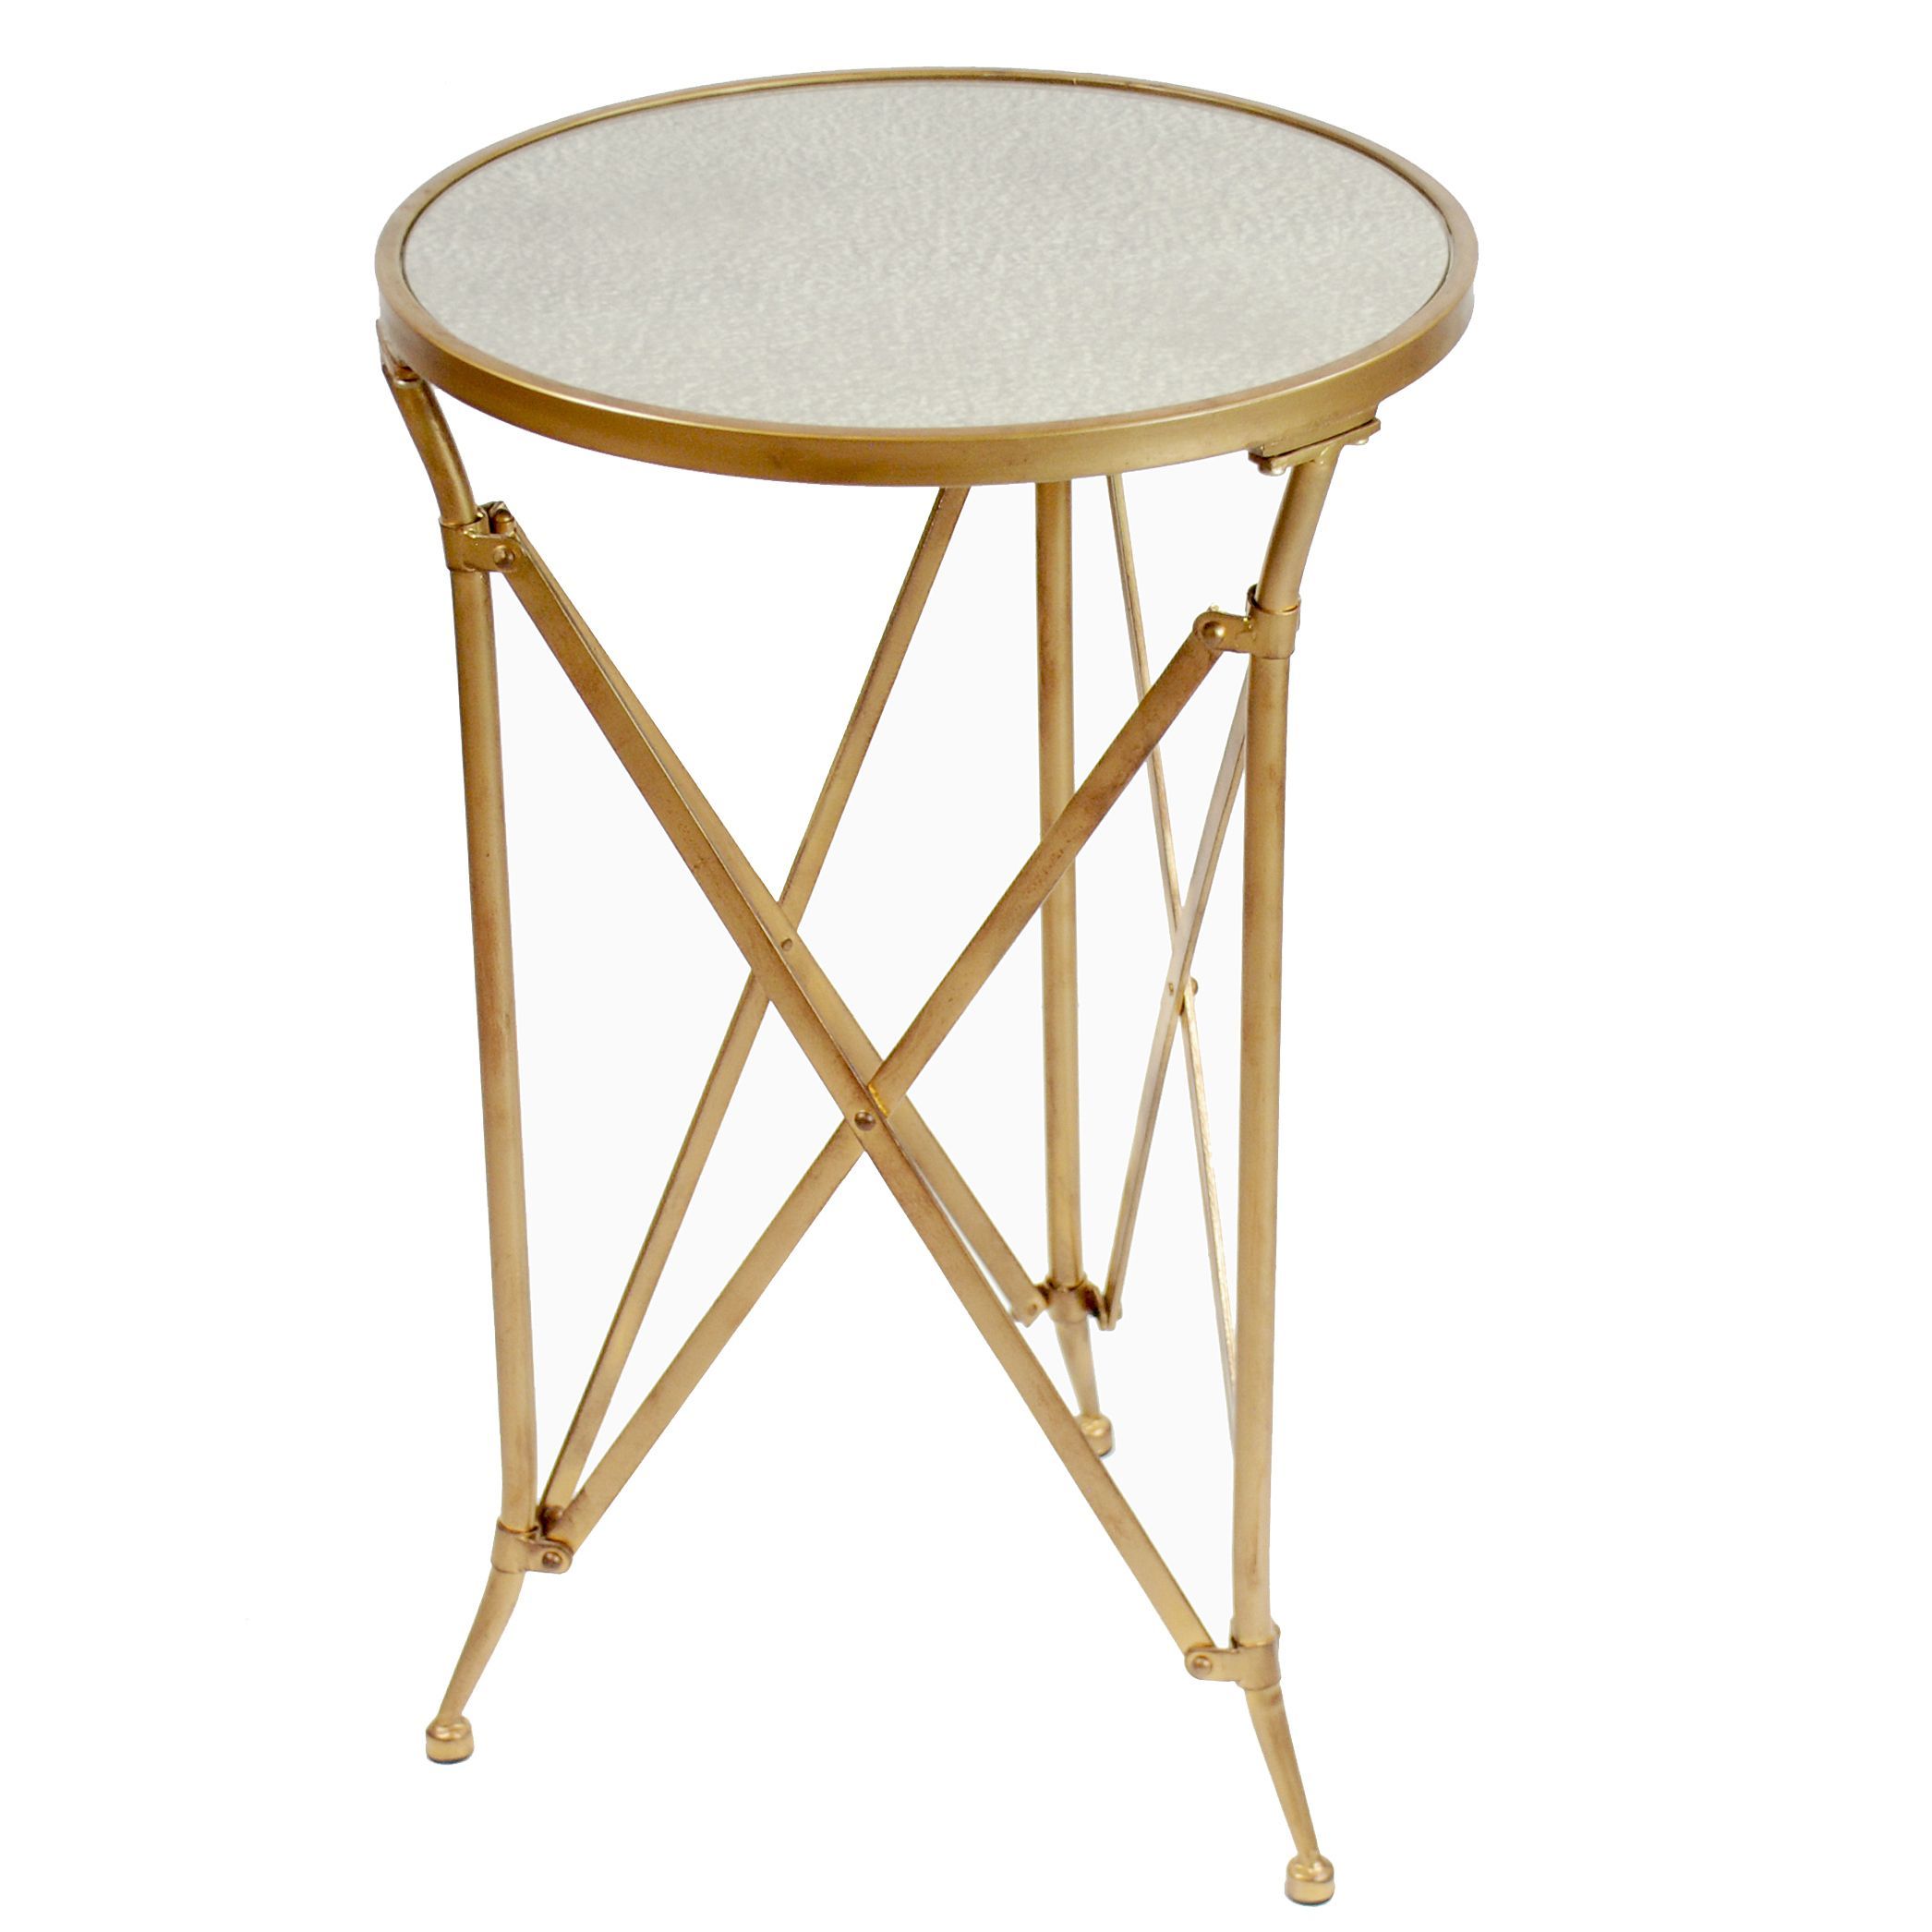 $18rround Accent Table With Antique Gold Metal Frame And Mercury Glass Regarding Antique Gold And Glass Console Tables (View 20 of 20)